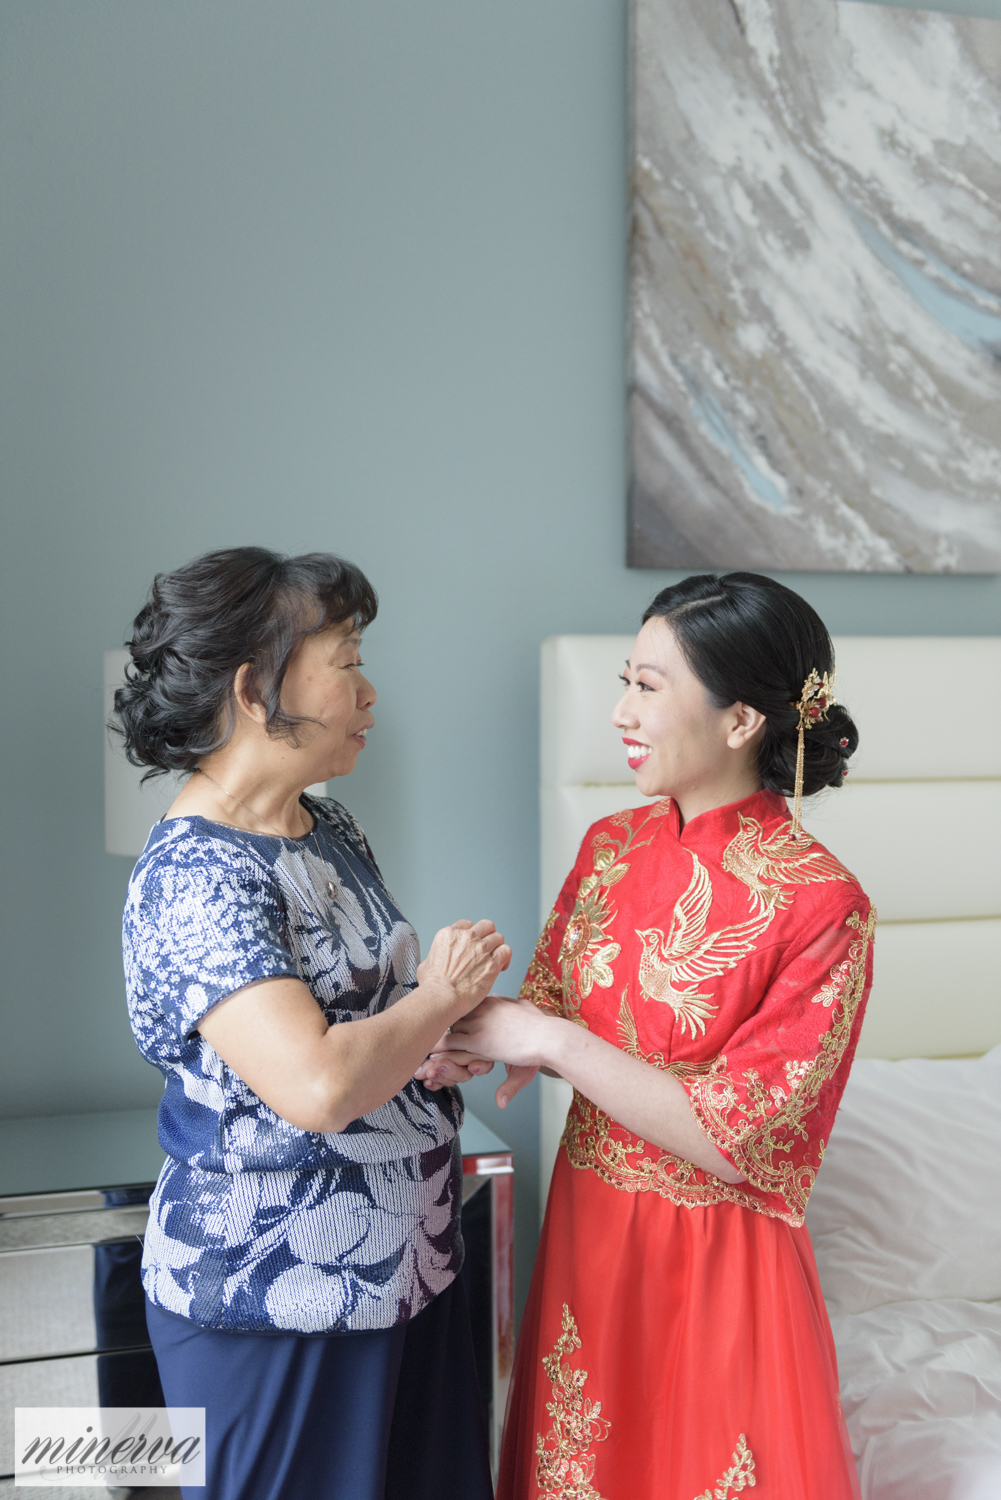 011_chinese-tea-ceremony_red-dress_four-seasons-resort-orlando_walt-disney-world_wedding_first-look_staircase_central-florida-photographer_luxury-photography